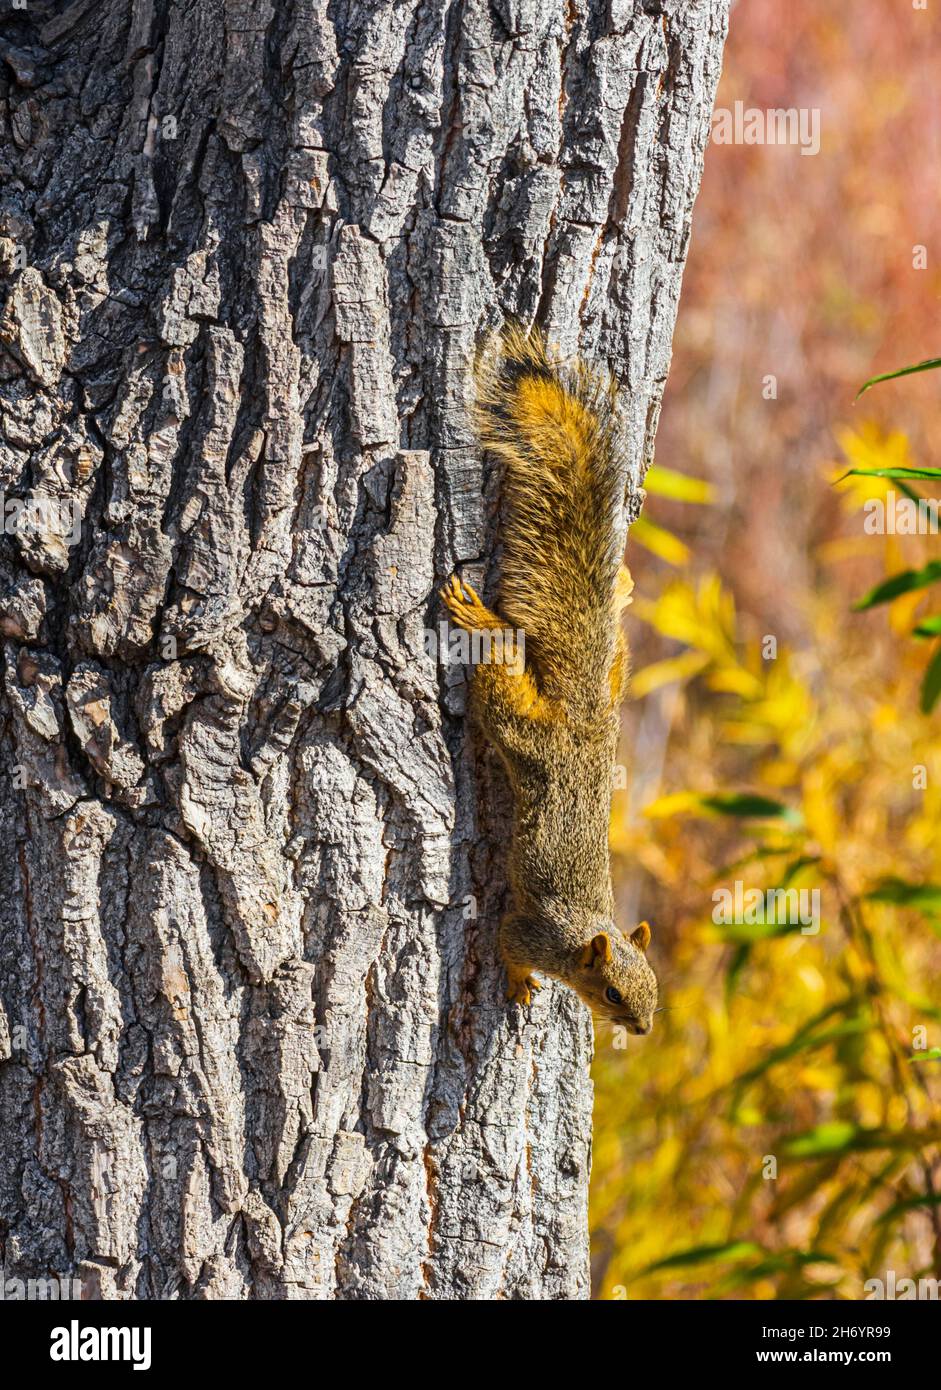 Eastern Fox Squirrel (Sciurus niger) clings to rough bark of Plains Cottonwood Tree & is curious & alert to the photographer, Castle Rock Colorado USA. Stock Photo